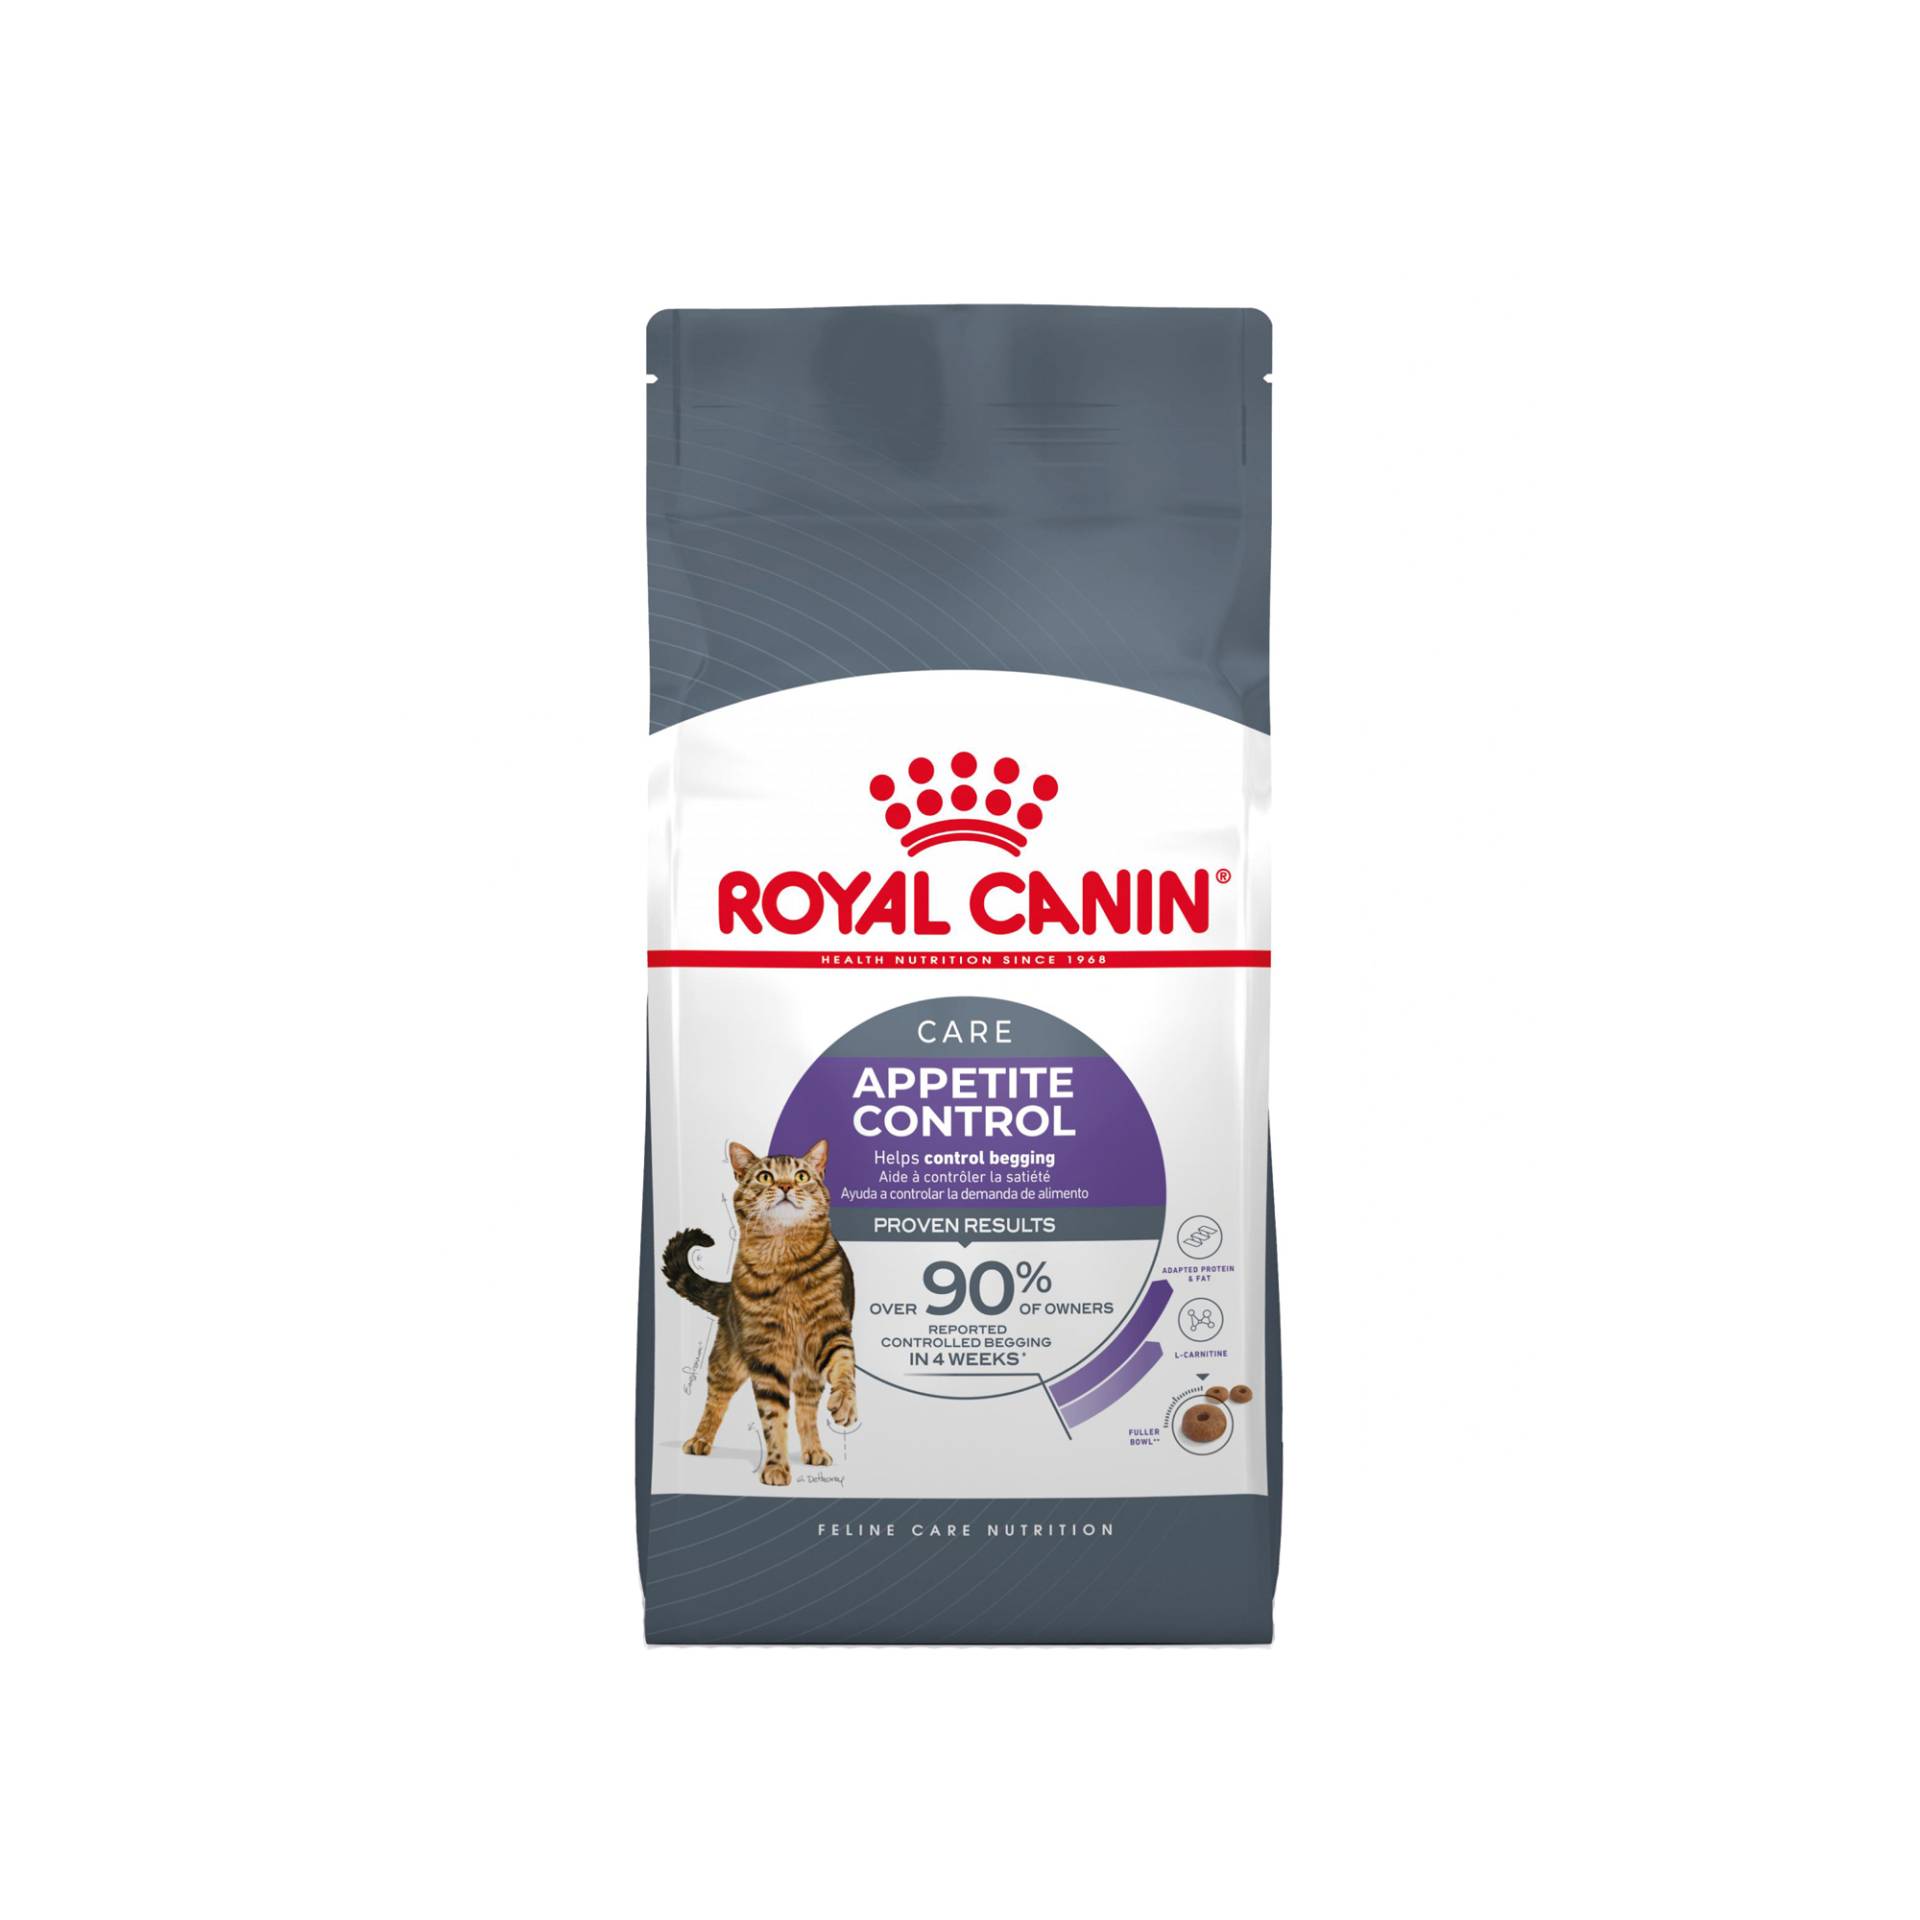 Royal Canin Appetite Control Care - 2 kg von Royal Canin